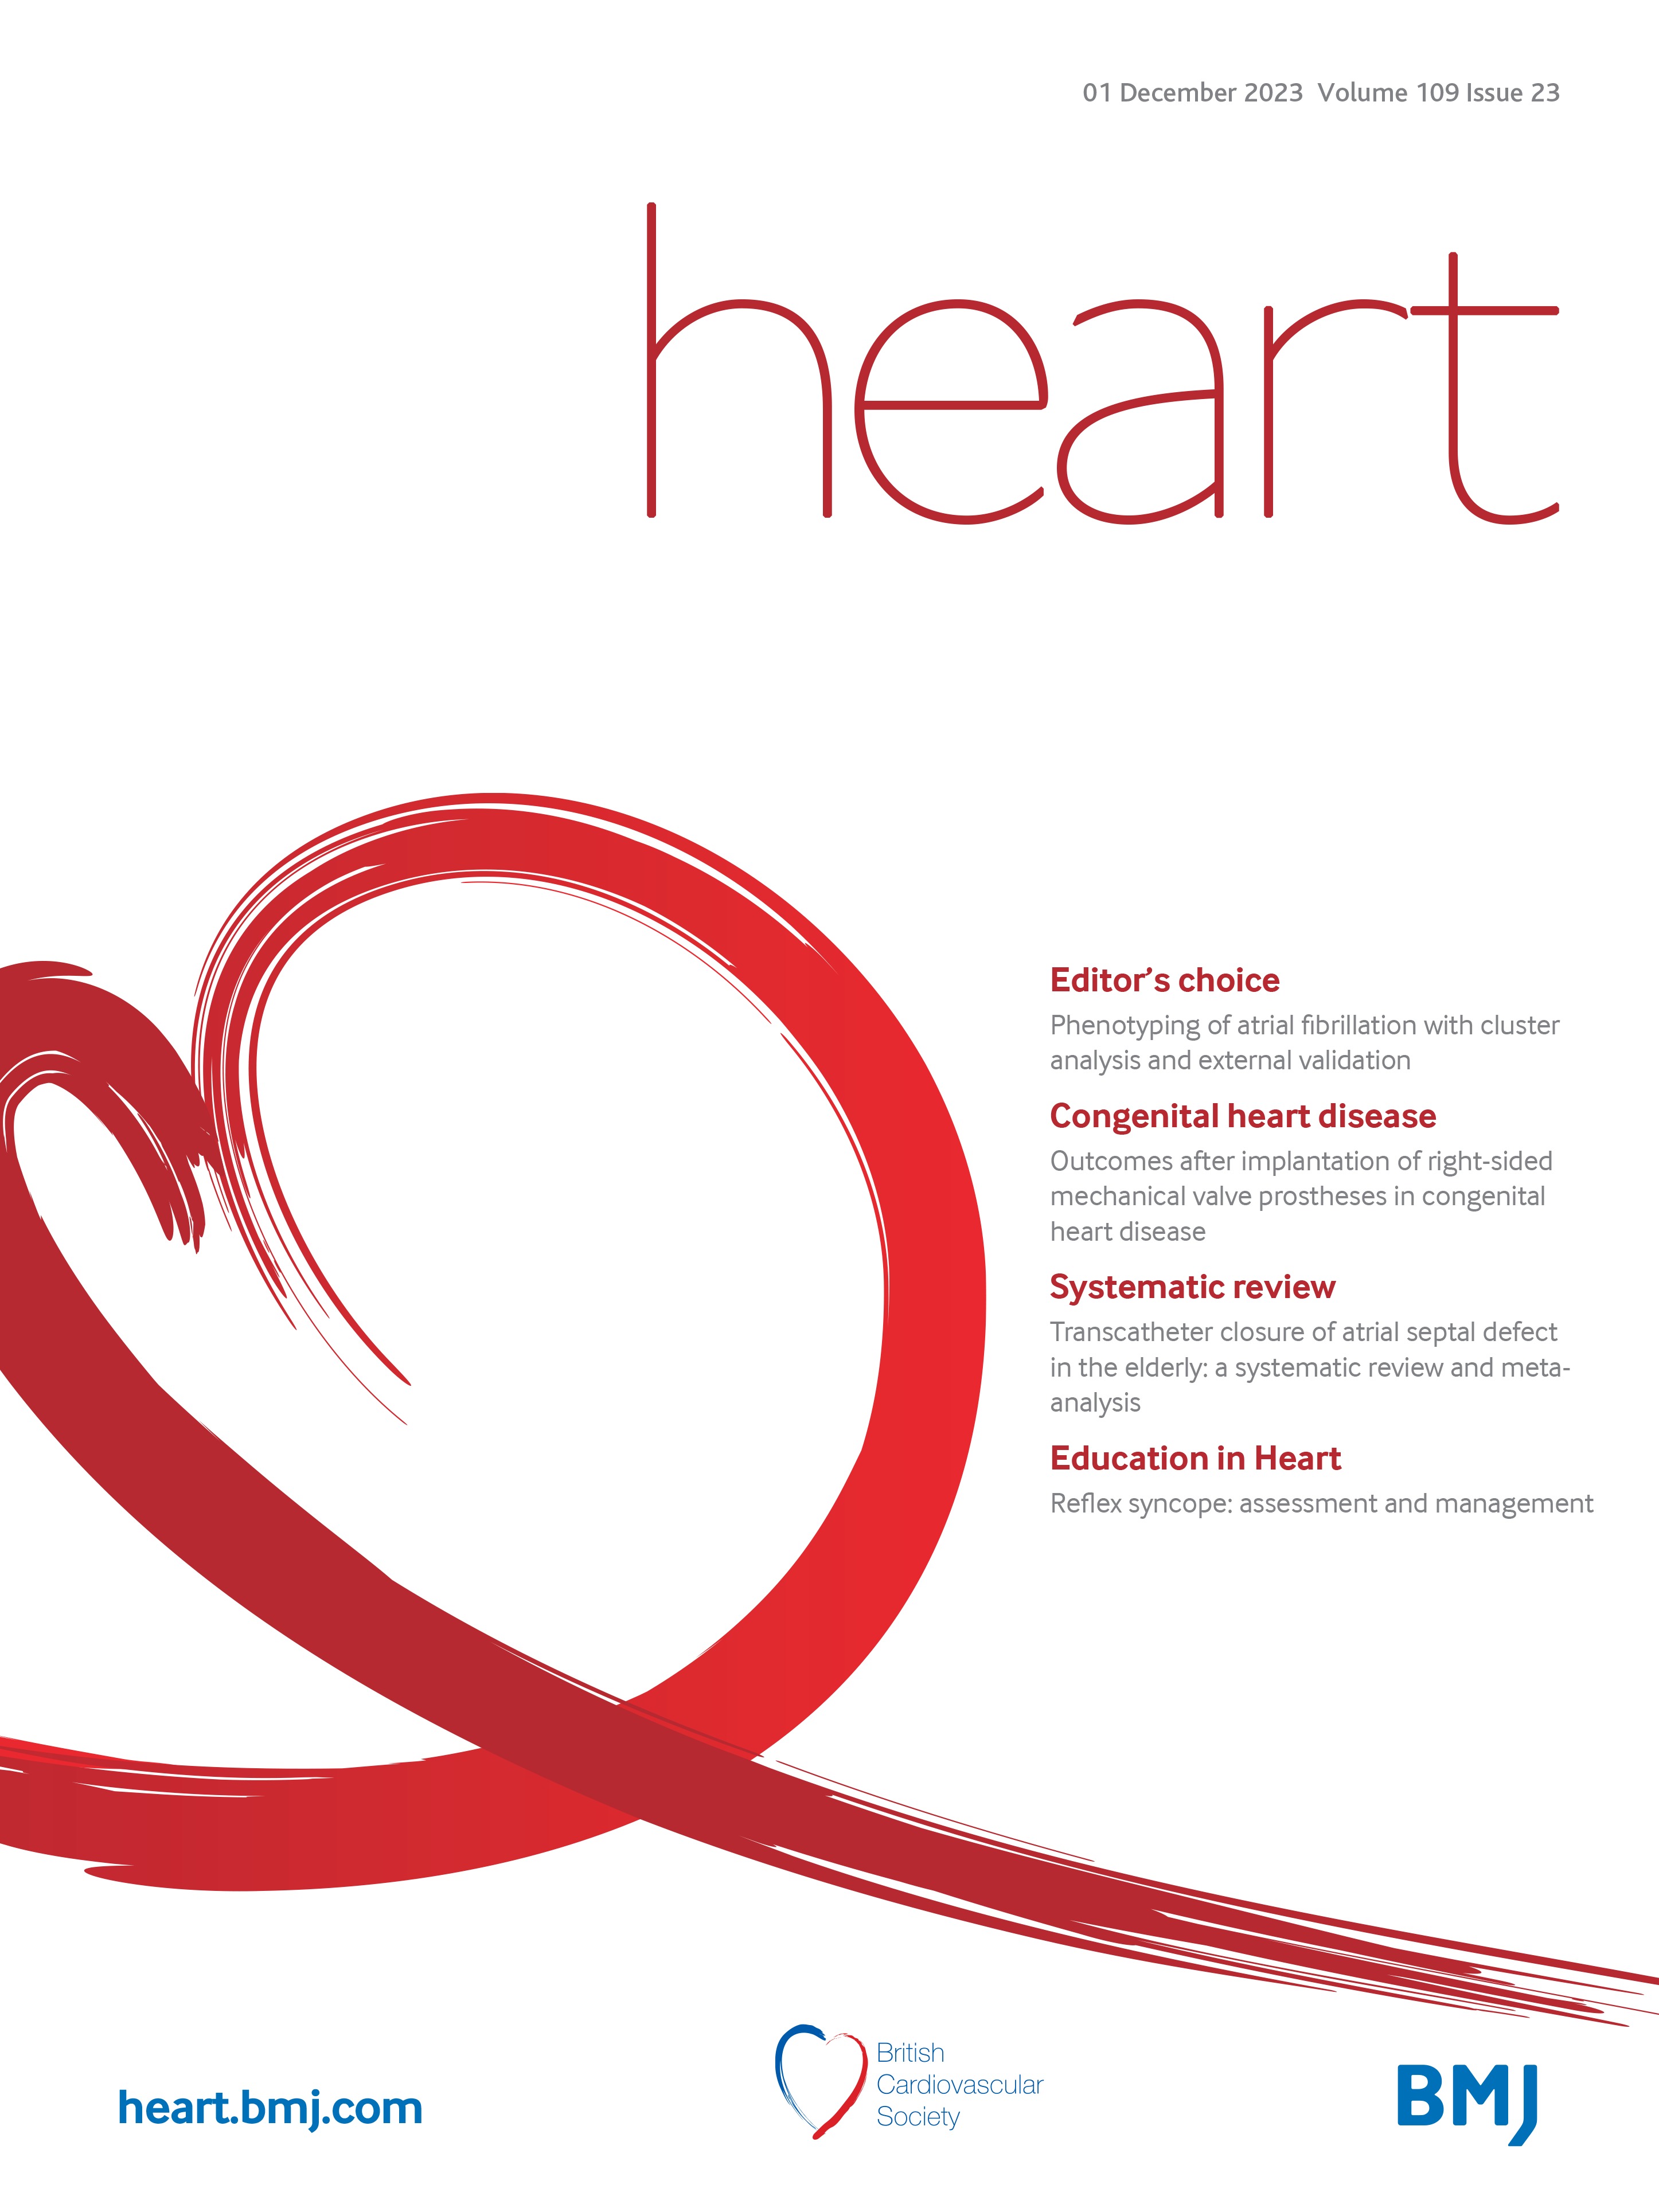 Transcatheter closure of atrial septal defect in the elderly: a systematic review and meta-analysis